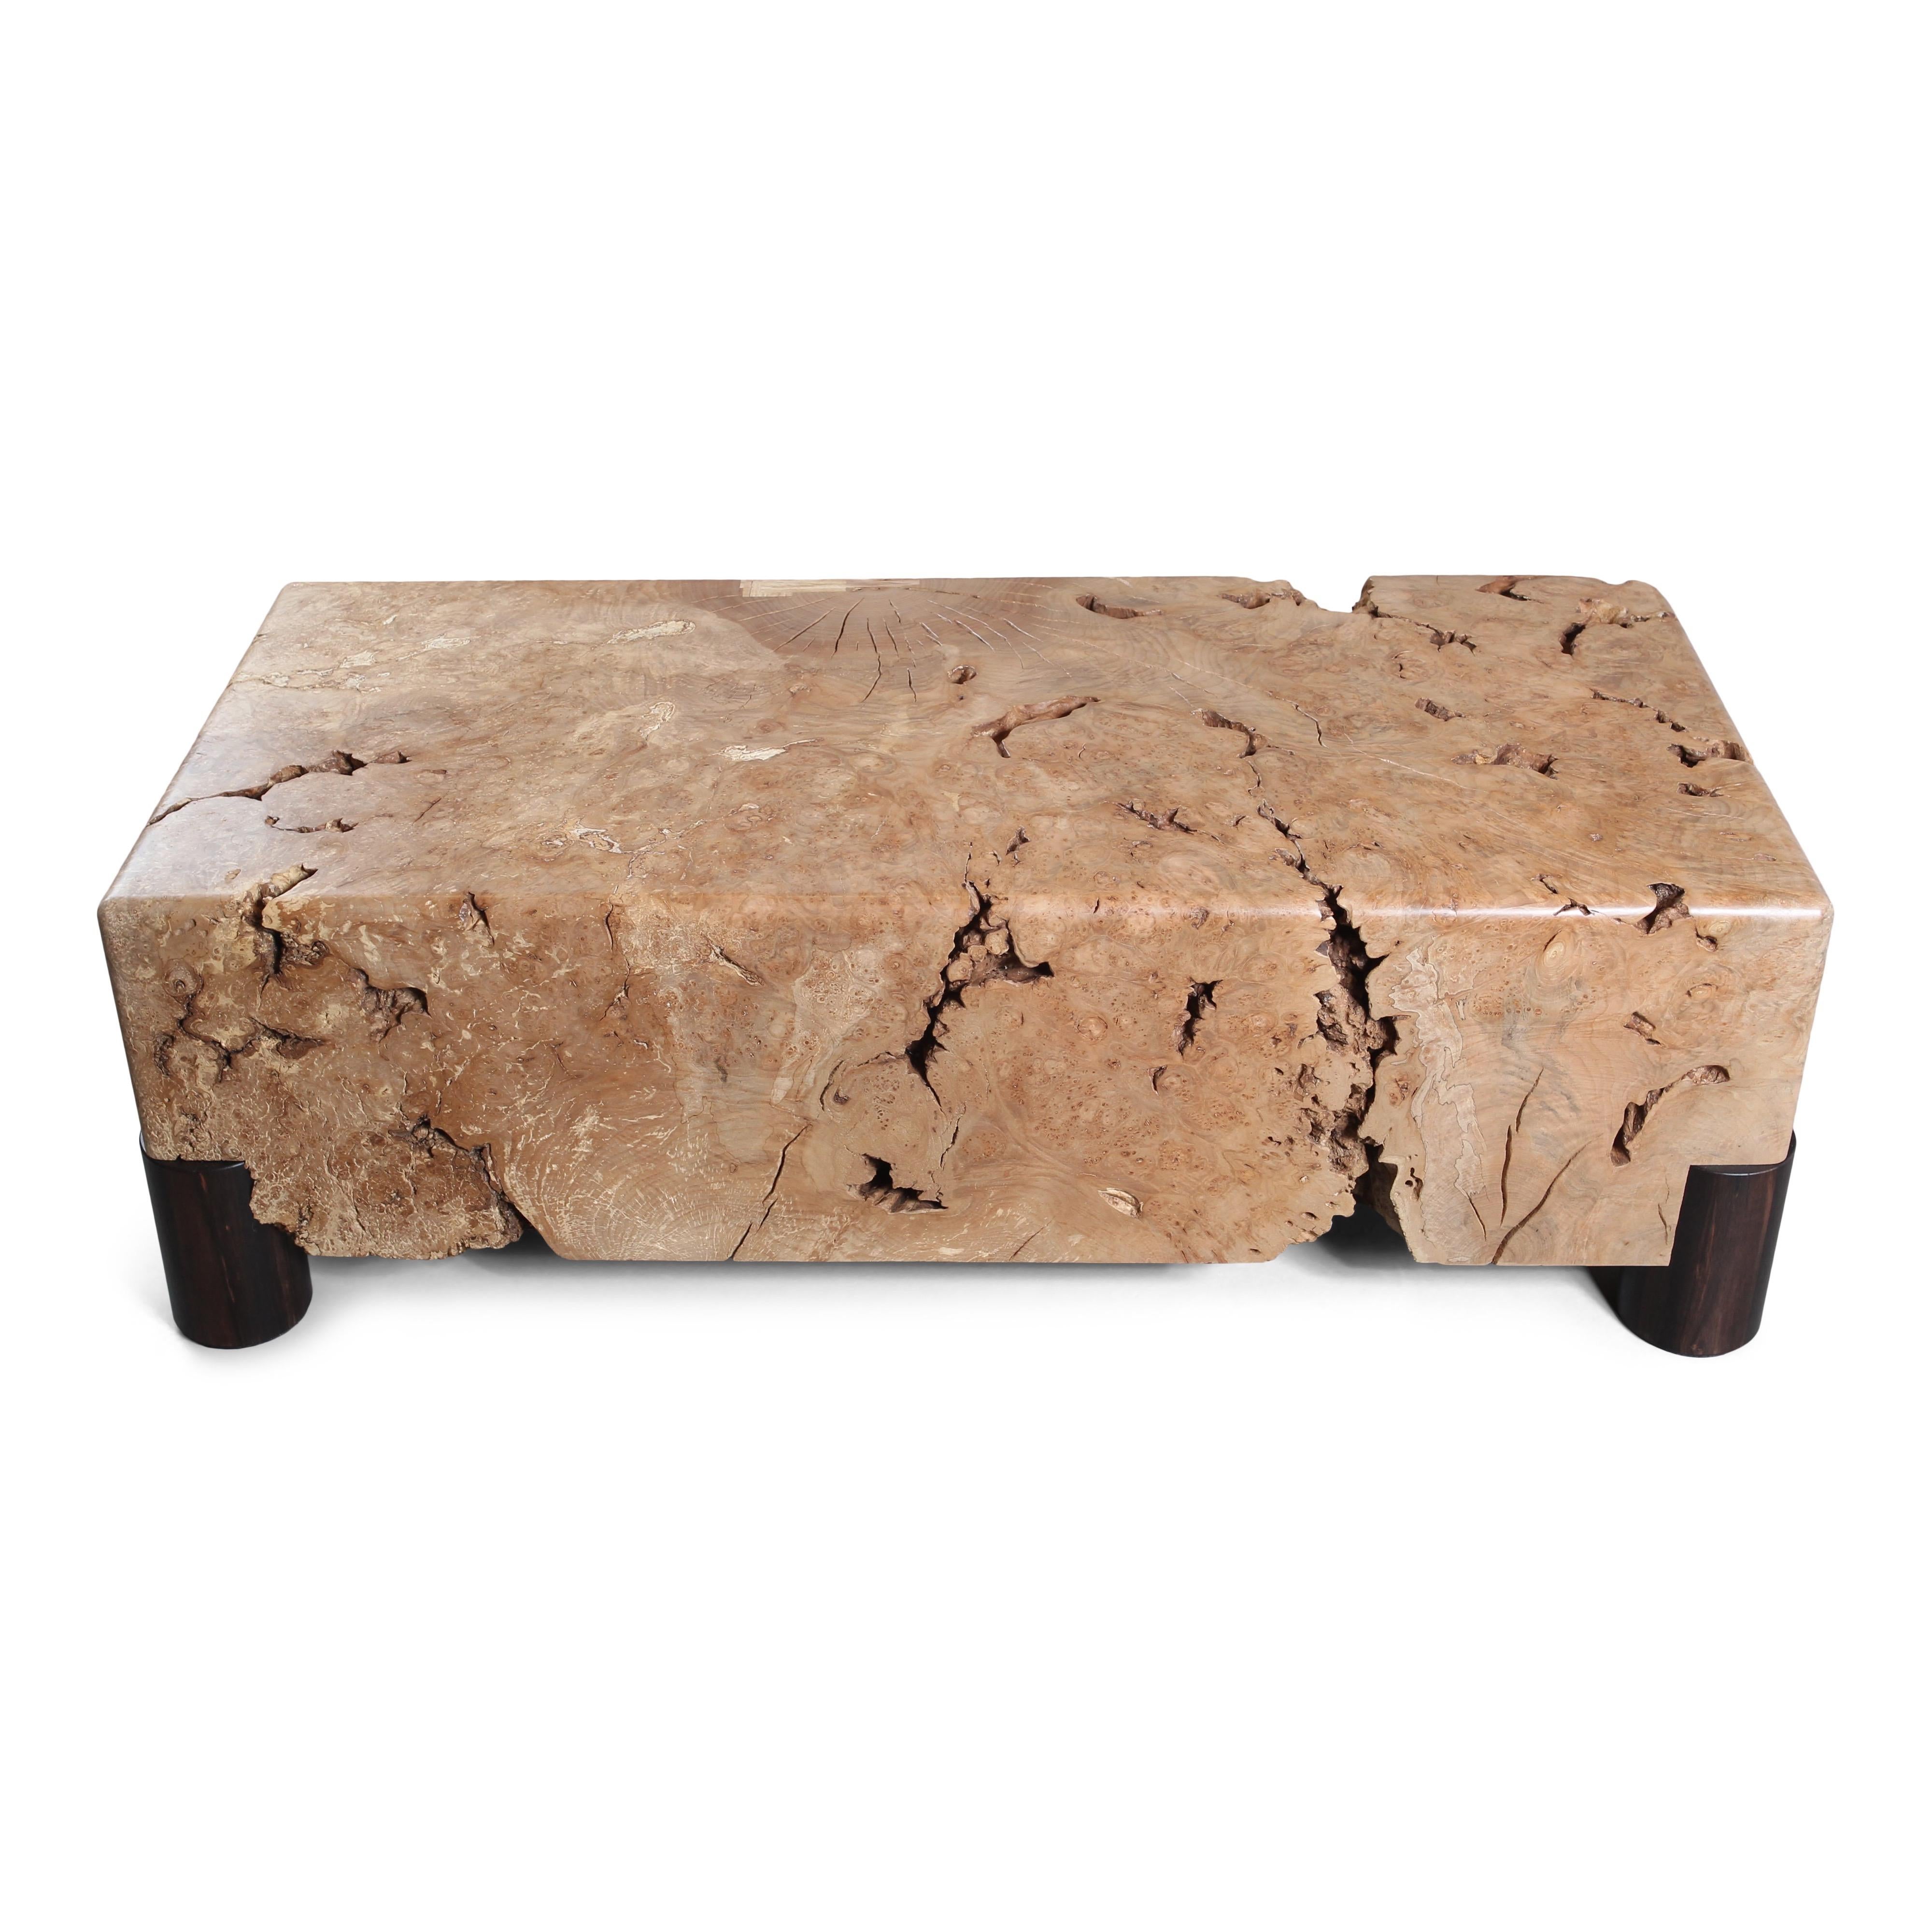 A solid chunk of figured Western Maple burl meticulously sculpted to a level that allows it to serve as a functional table while maintaining its organic feel. Hand-turned Macassar Ebony legs support the table on each corner.

The burl itself has